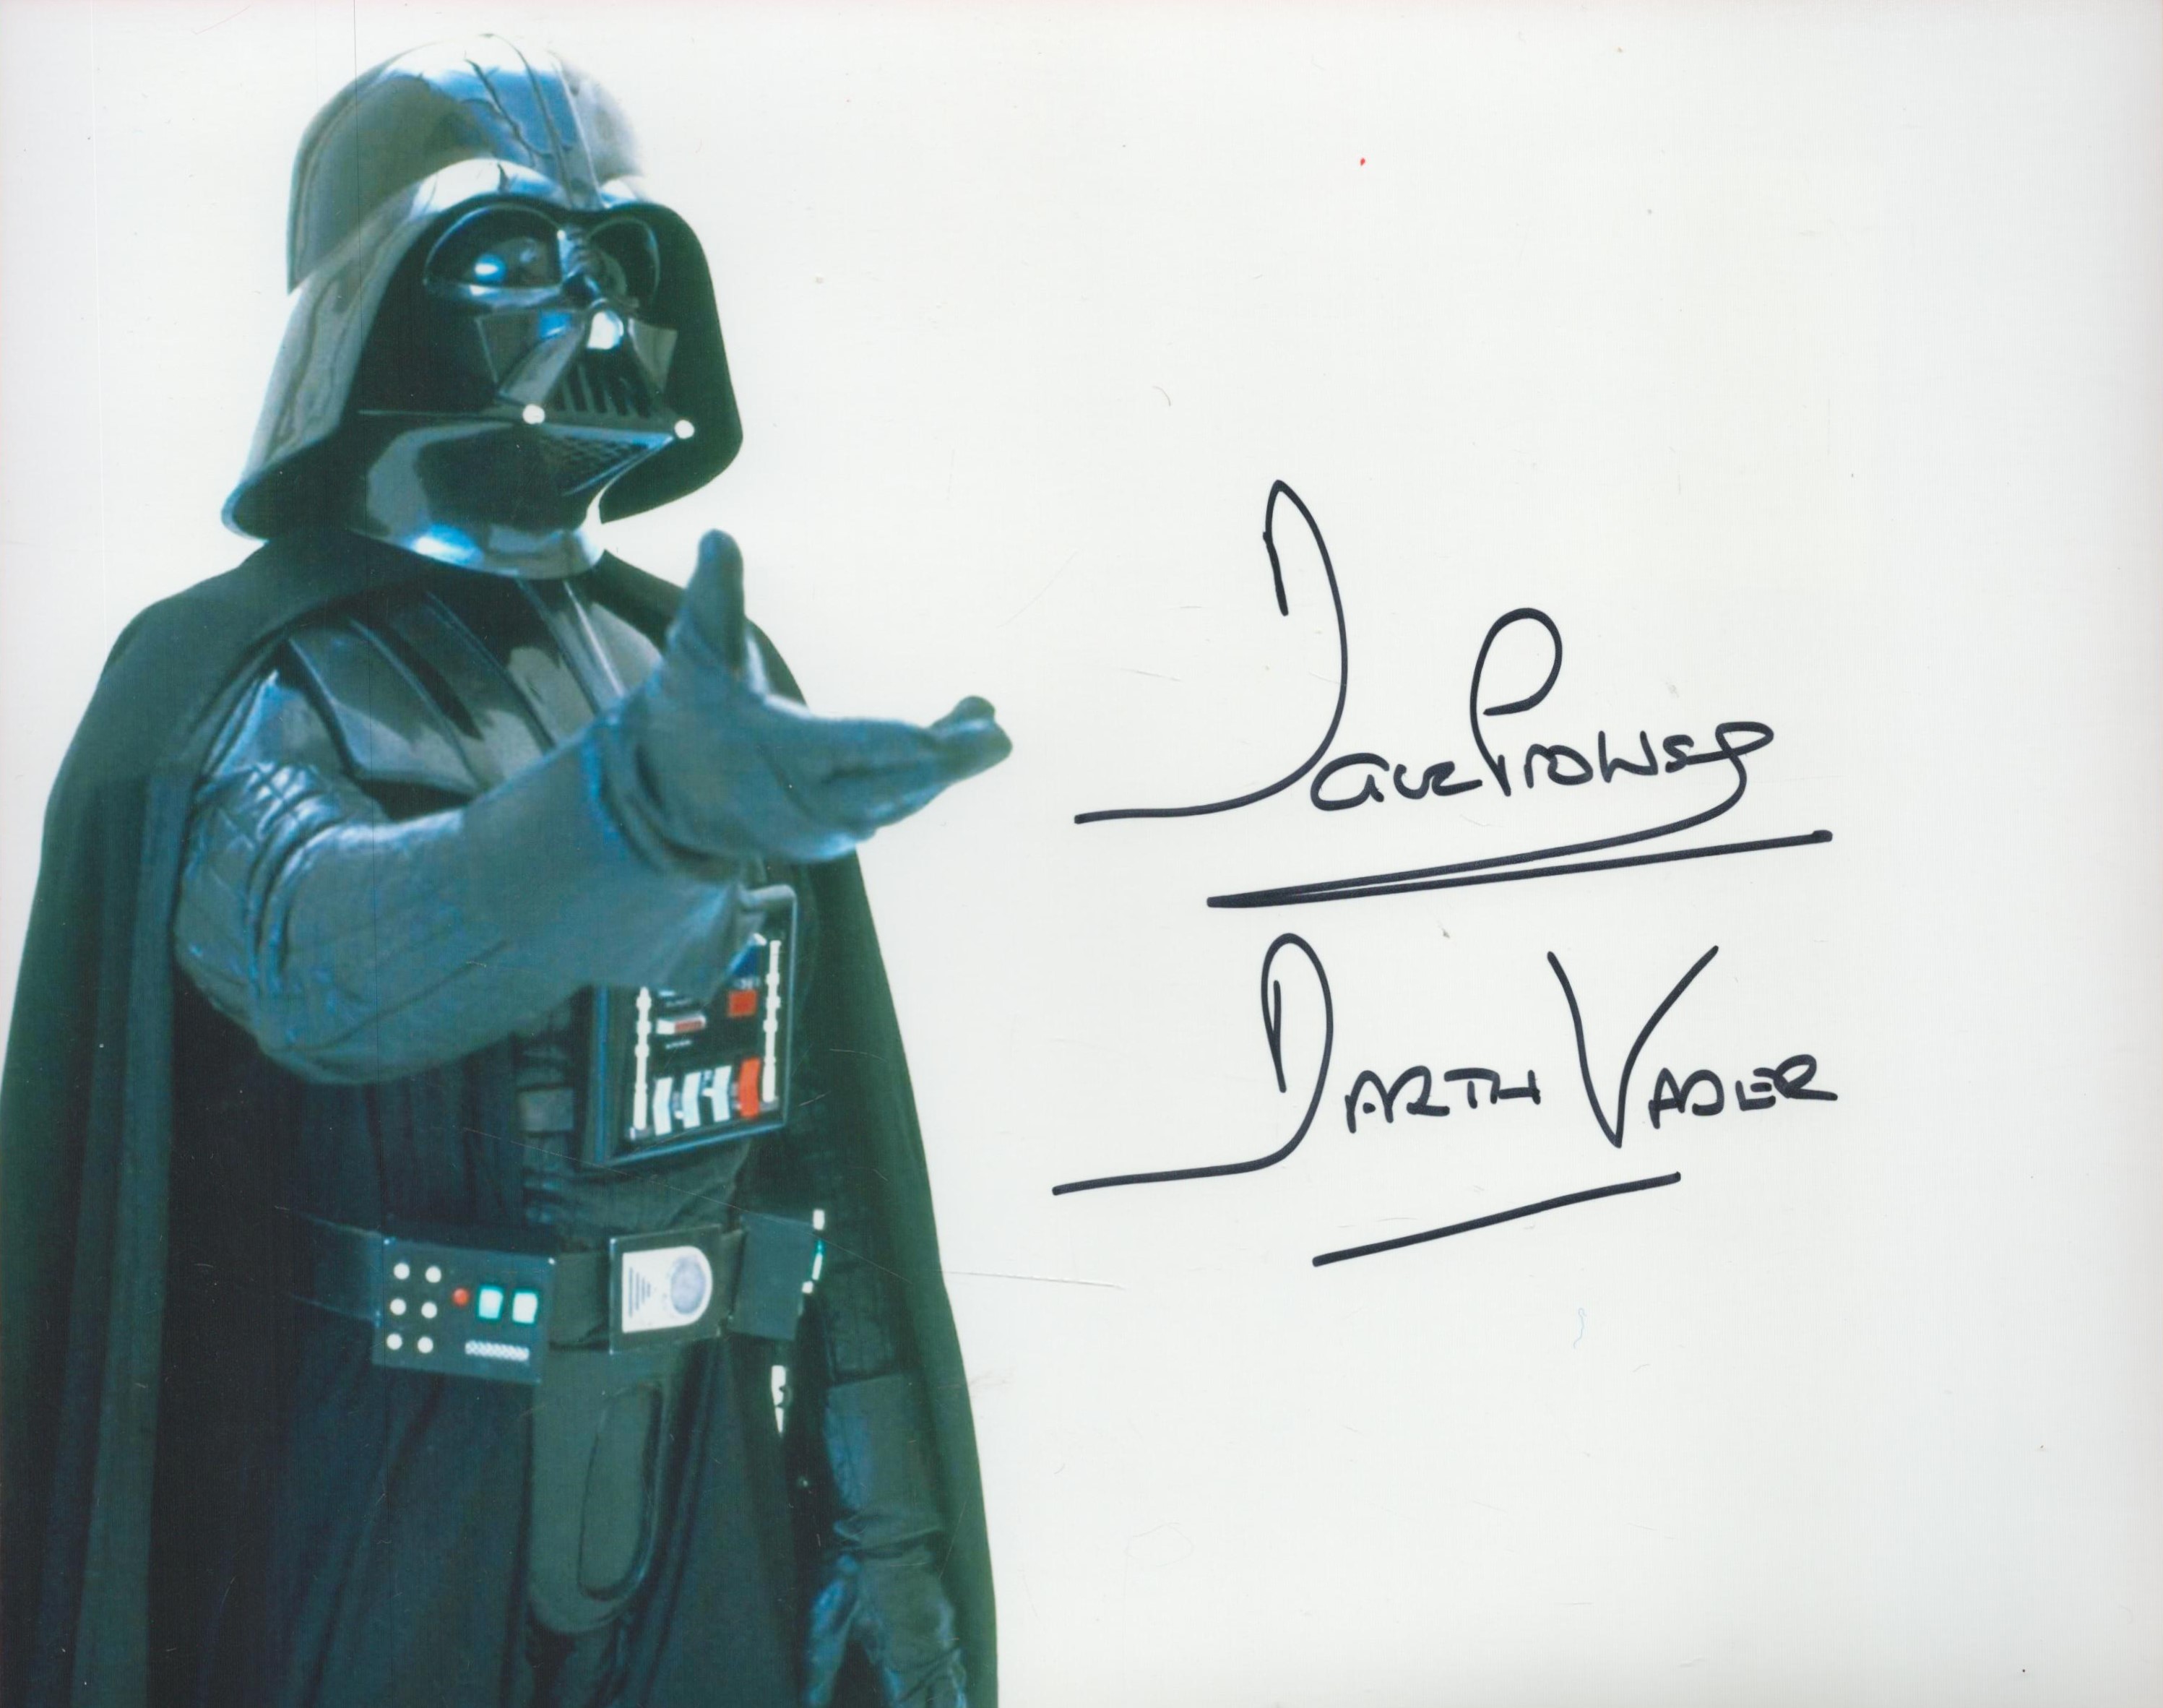 Star Wars Dave Prowse as Darth Vadar signed 10 x 8 inch colour photo. Good condition. All autographs